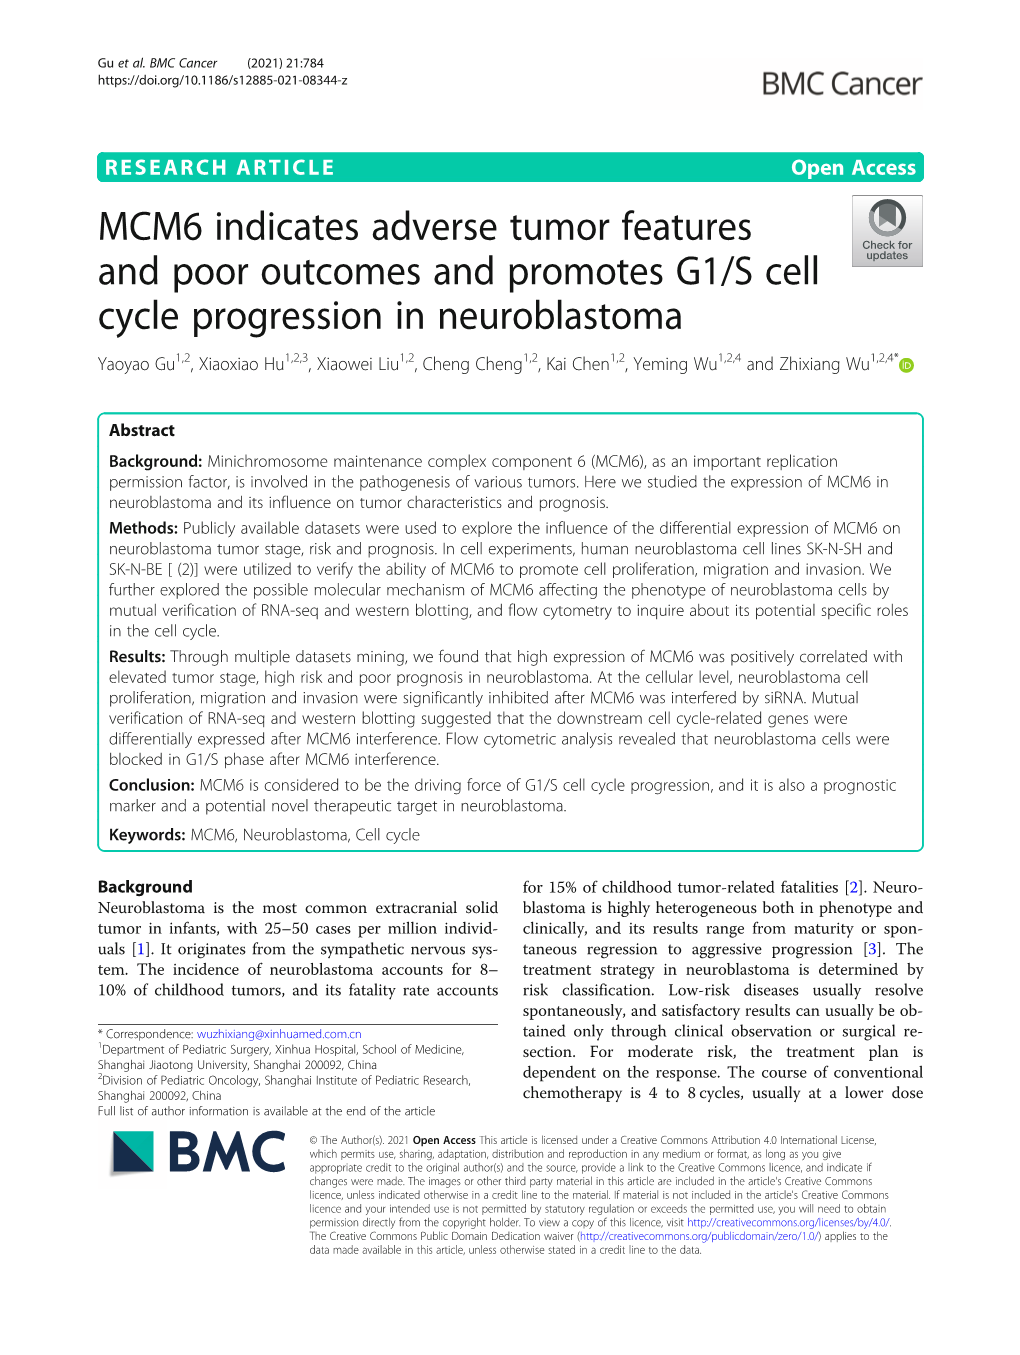 MCM6 Indicates Adverse Tumor Features and Poor Outcomes and Promotes G1/S Cell Cycle Progression in Neuroblastoma